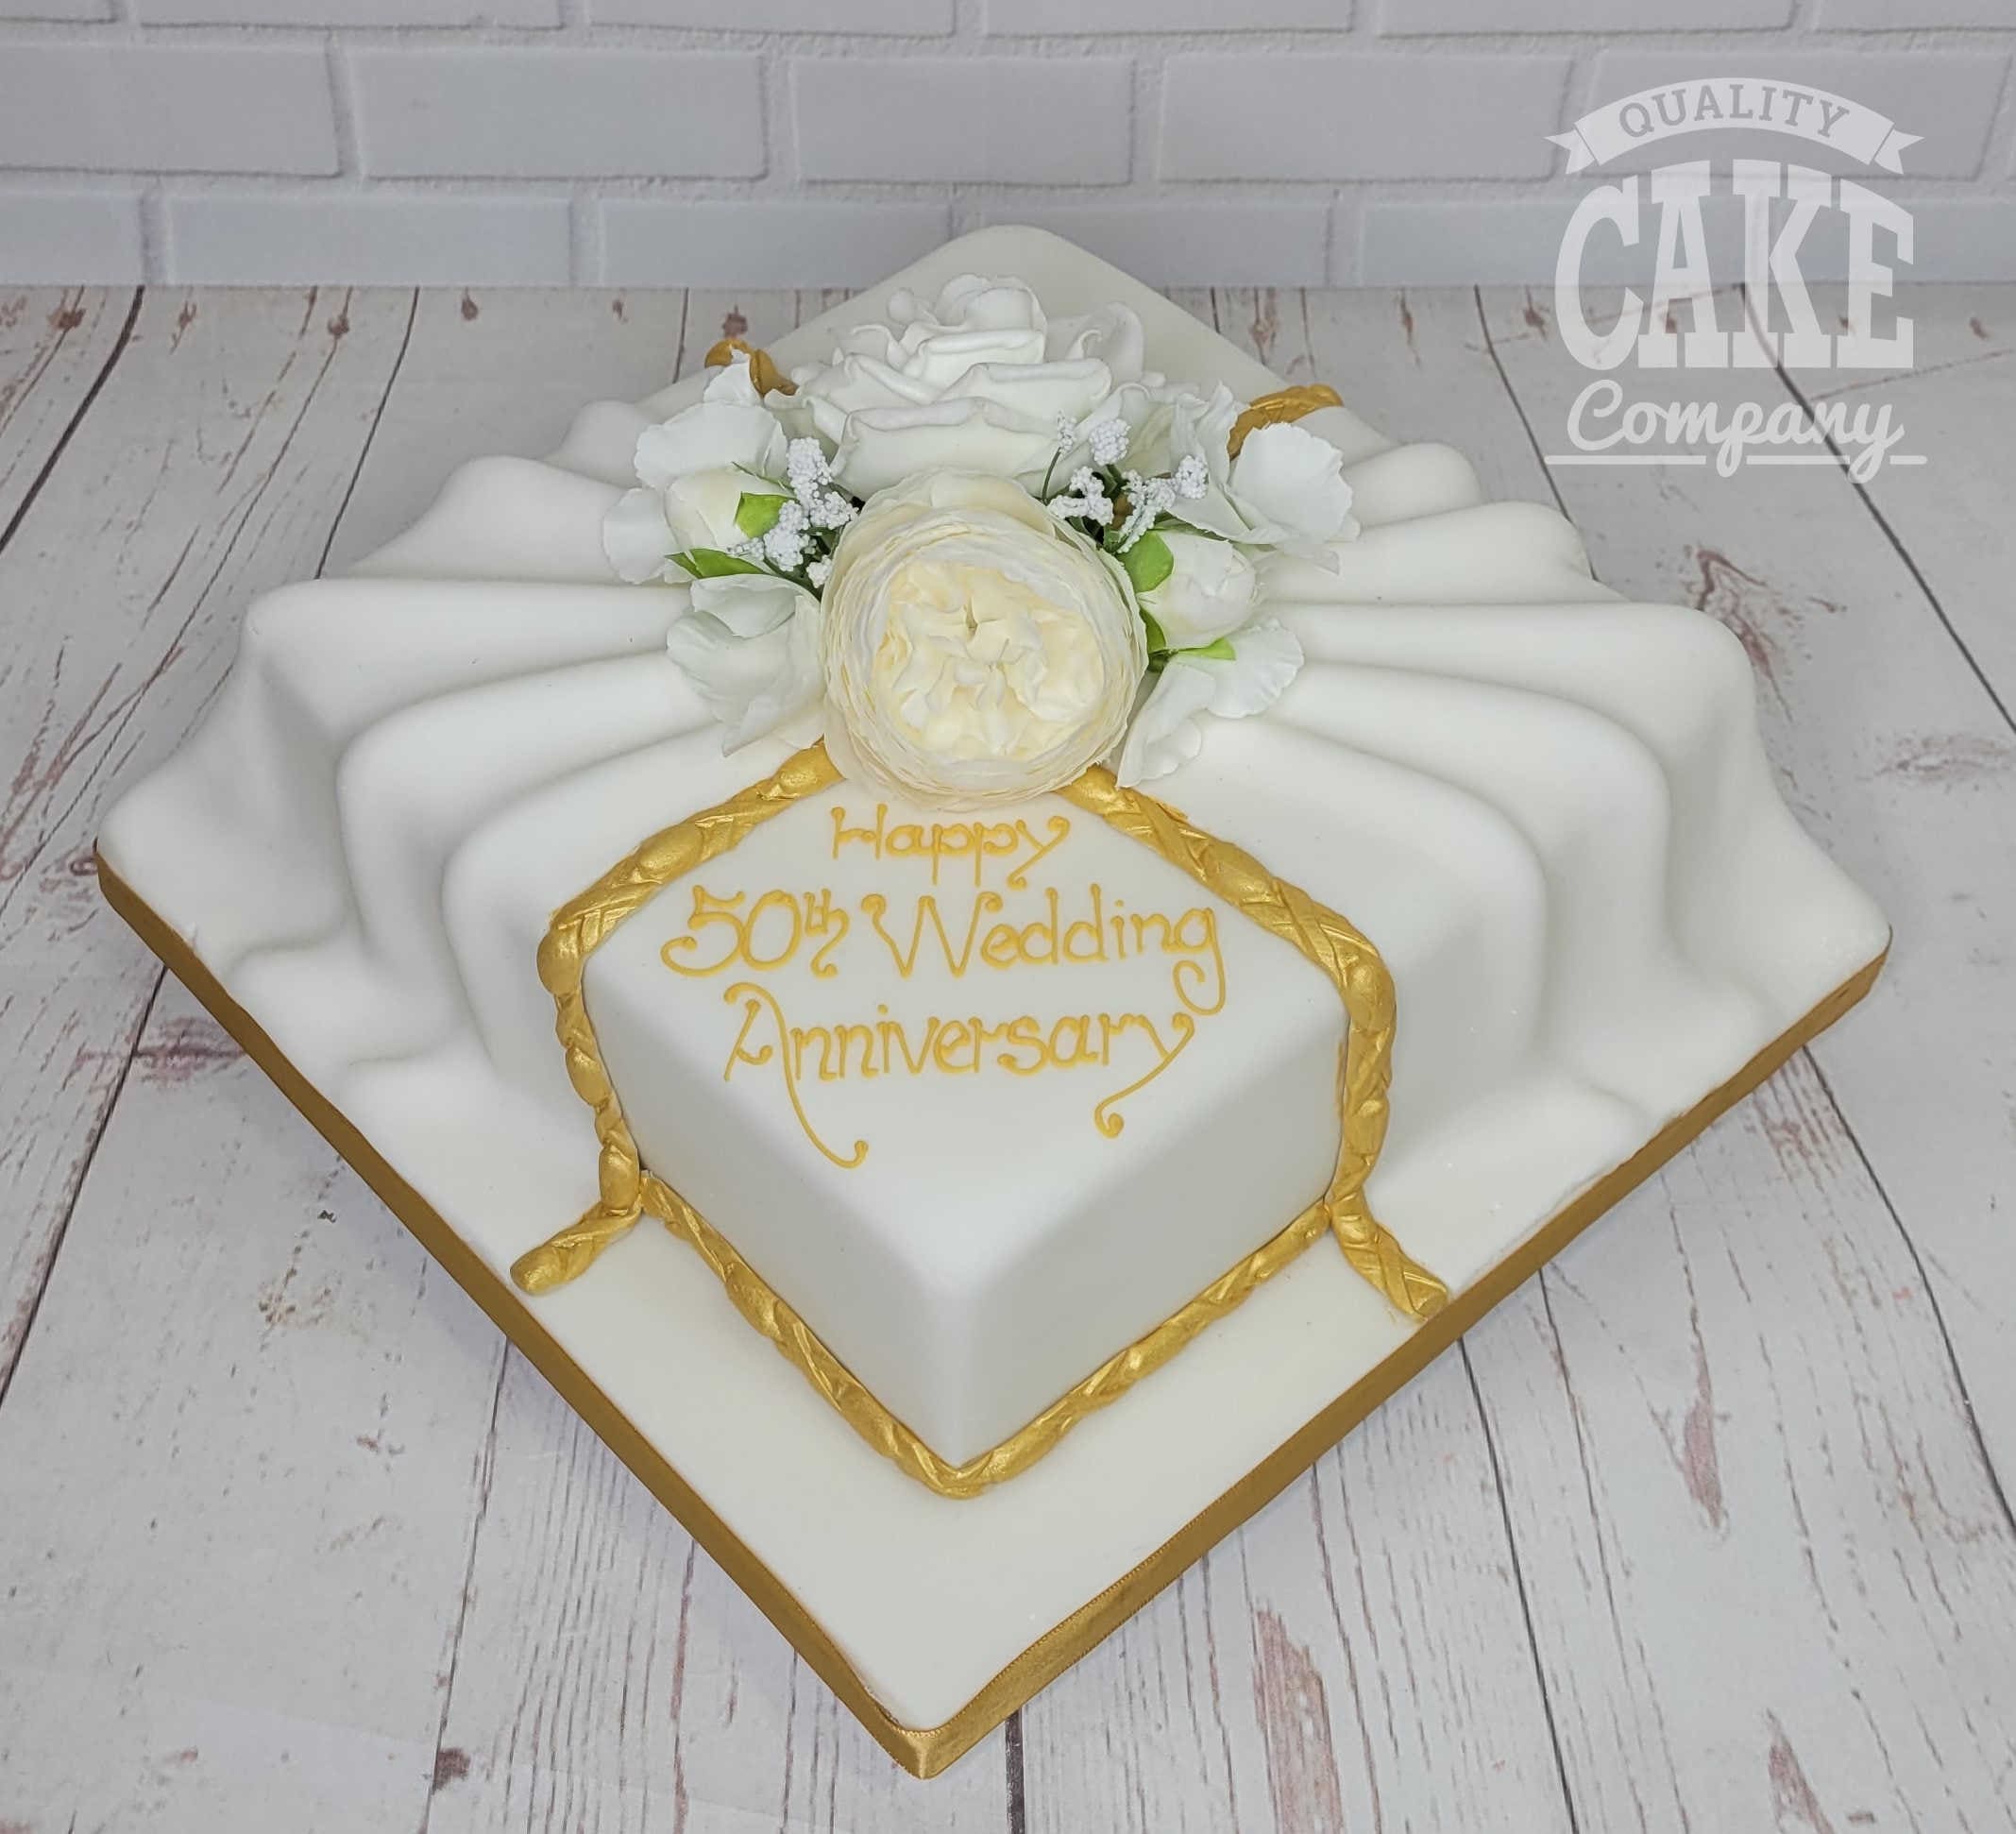 25th Anniversary Cakes Buy Online Quick Delivery - Dough and Cream